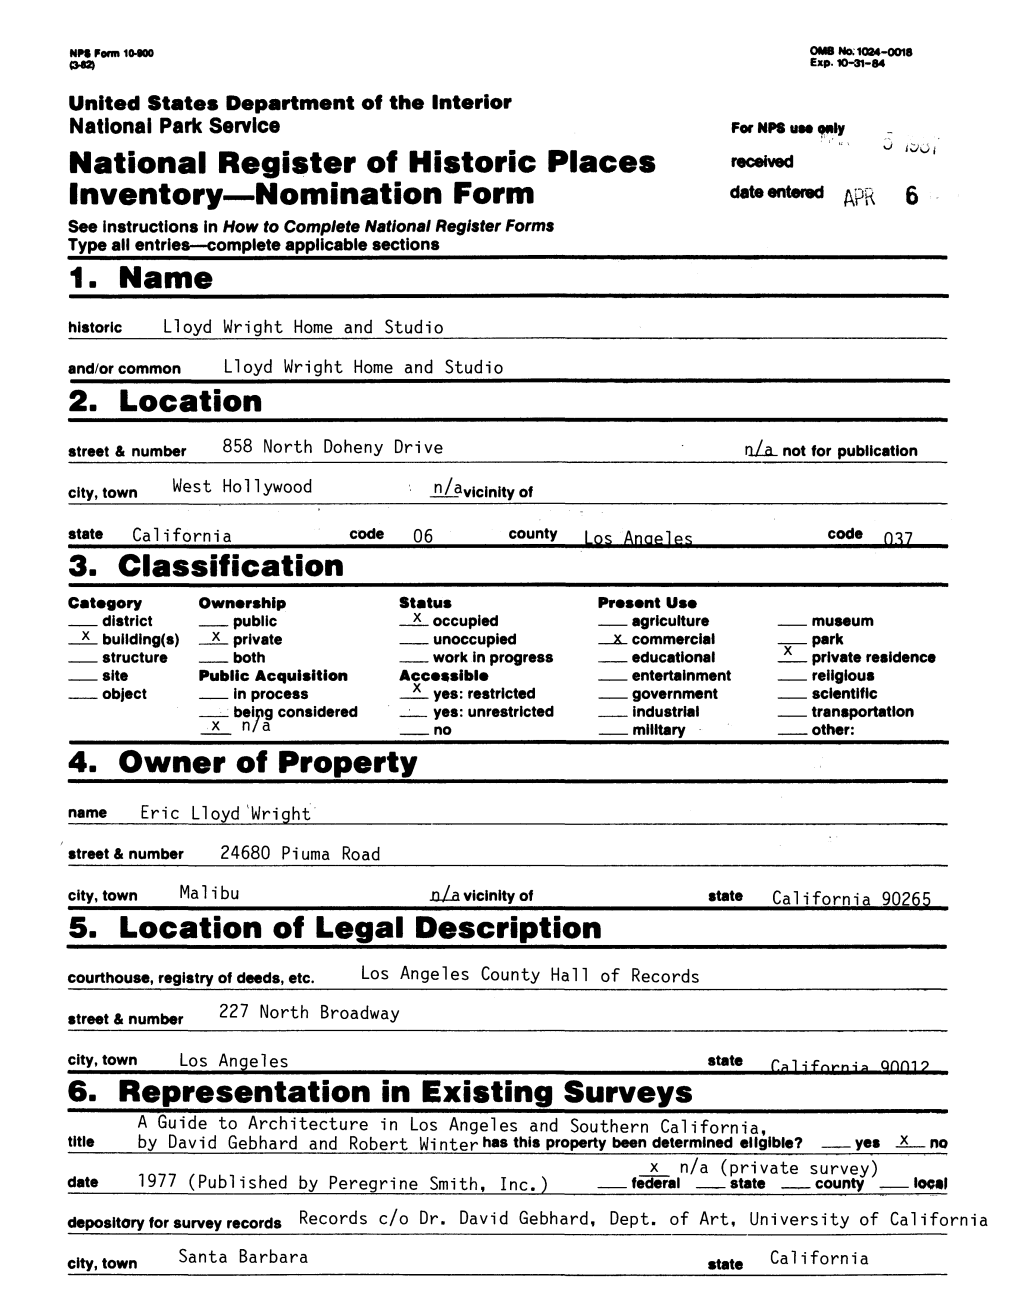 National Register of Historic Places Inventory—Nomination Form Date Entered 1 . Name 2. Location 5. Location Off Legal Descrip